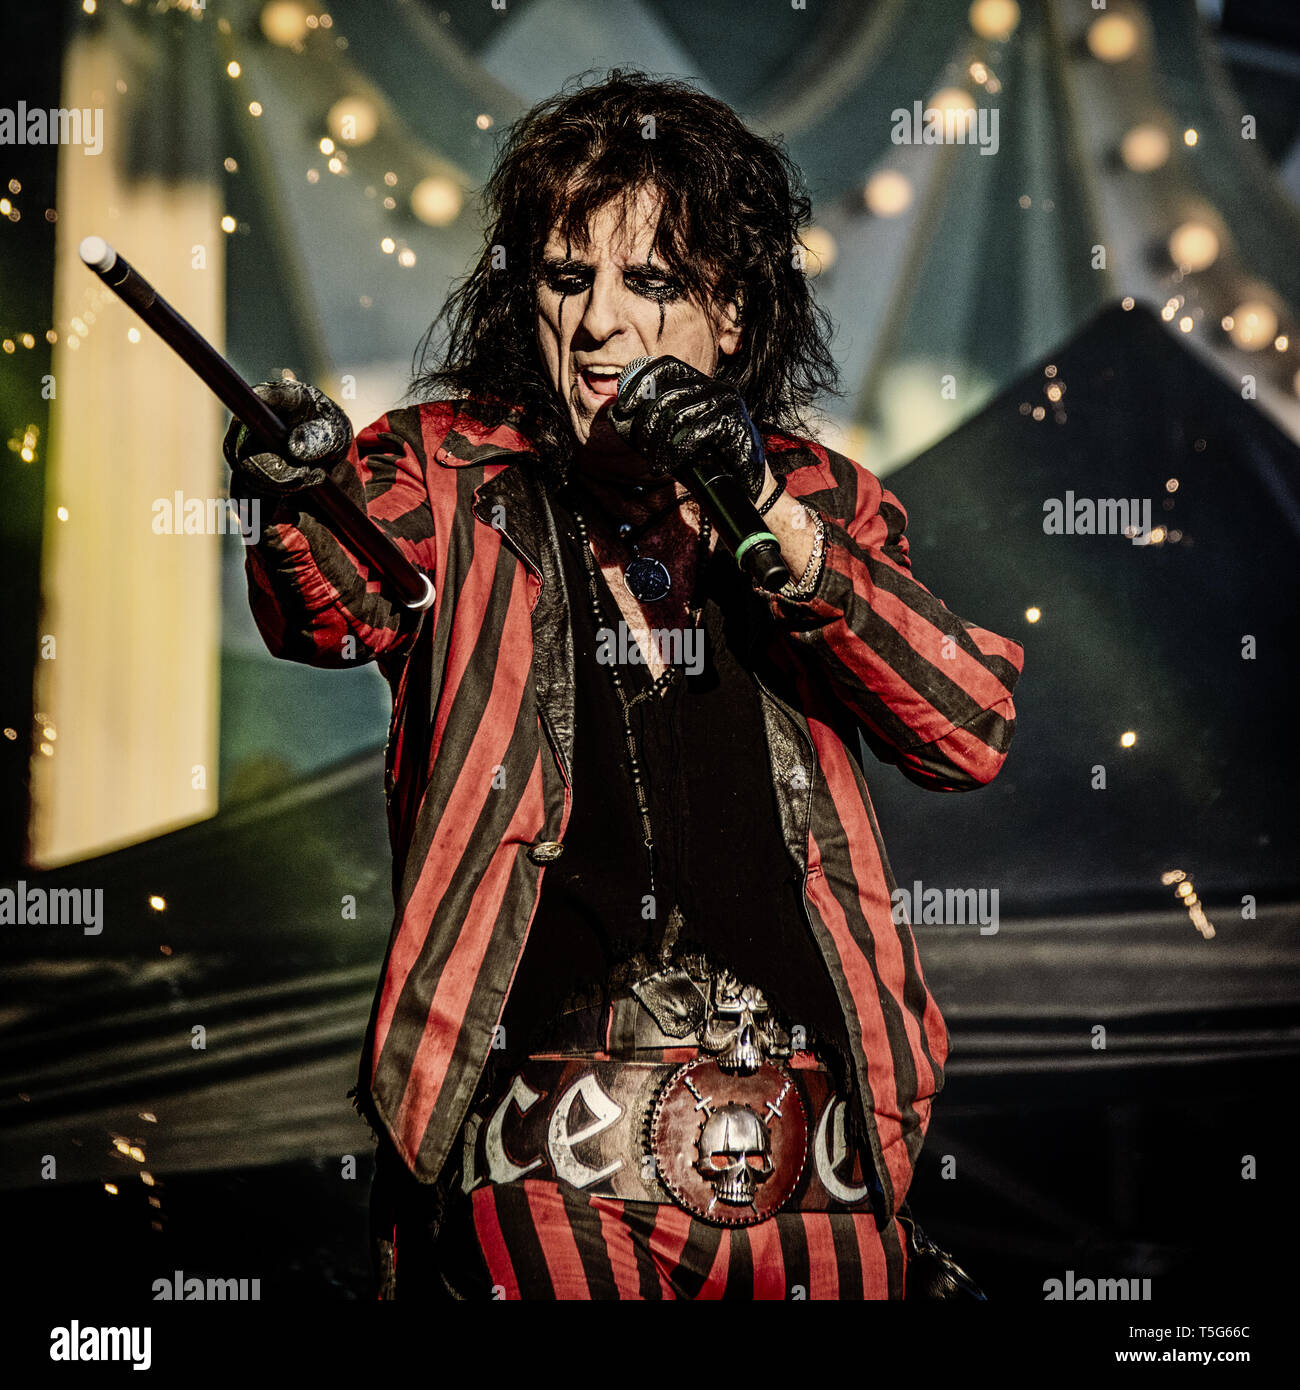 Alice Cooper with his band performing in Stockholm third of July 2015 at Gröna Lund amusement park. Stock Photo